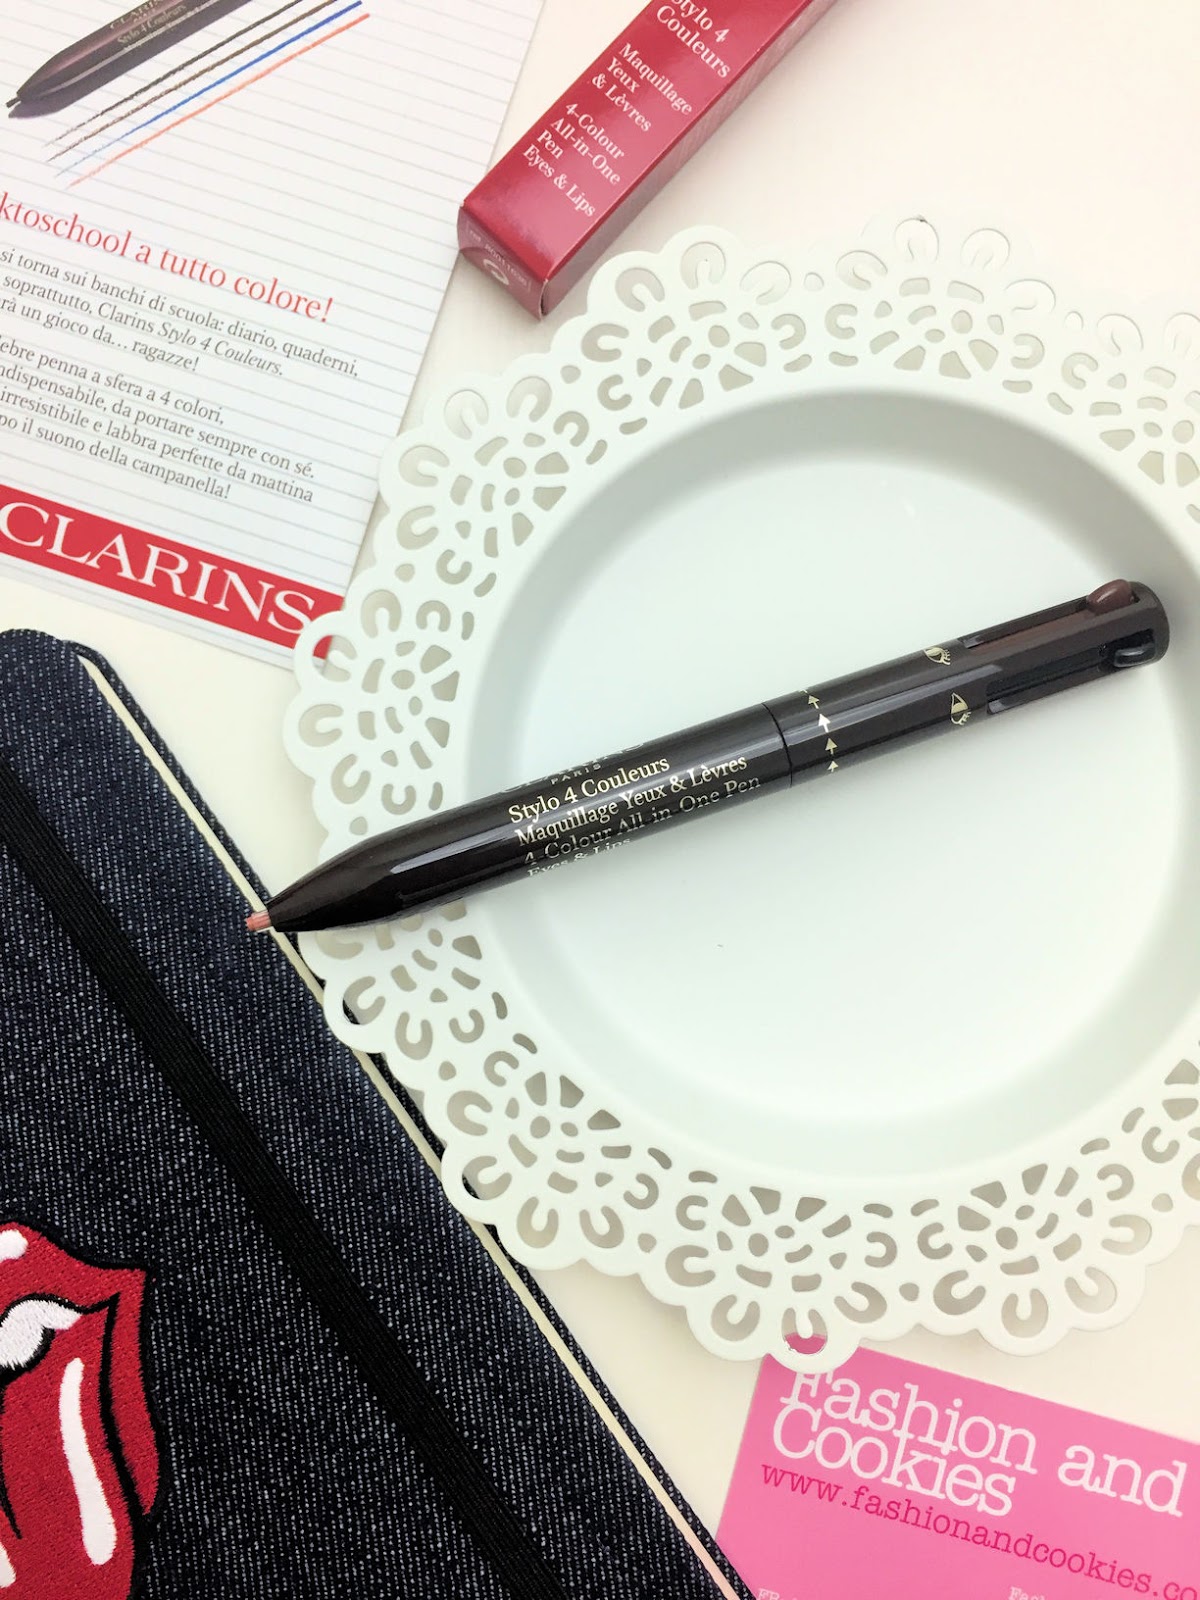 Clarins Stylo Yeux 4 Couleurs: penna makeup a 4 colori su Fashion and Cookies beauty blog, beauty blogger